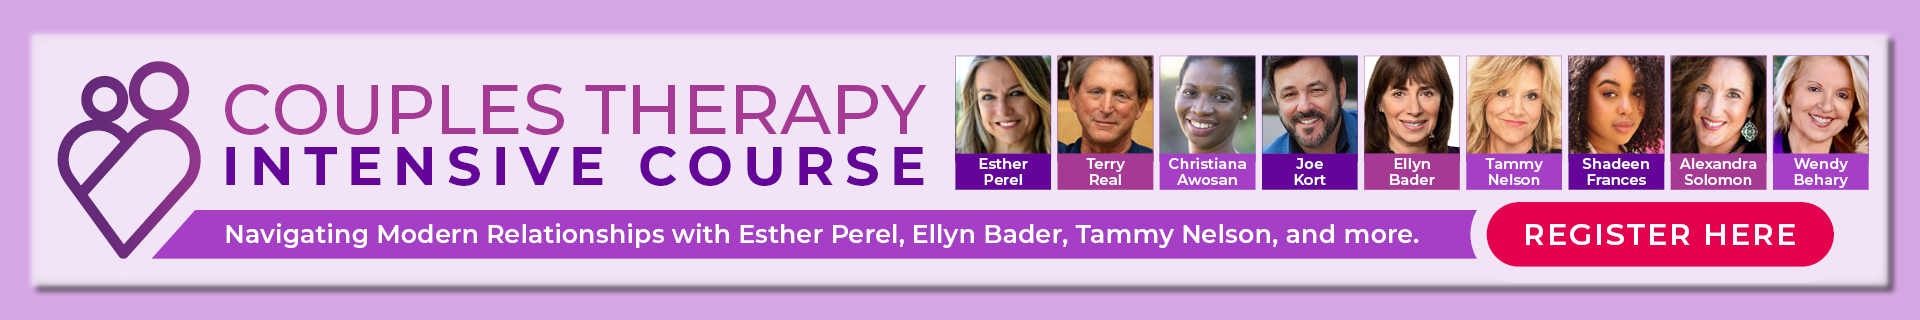 Couples Therapy Intensive Course: Navigating Modern Relationships with Esther Perel, Ellyn Bader, Tammy Nelson, and more